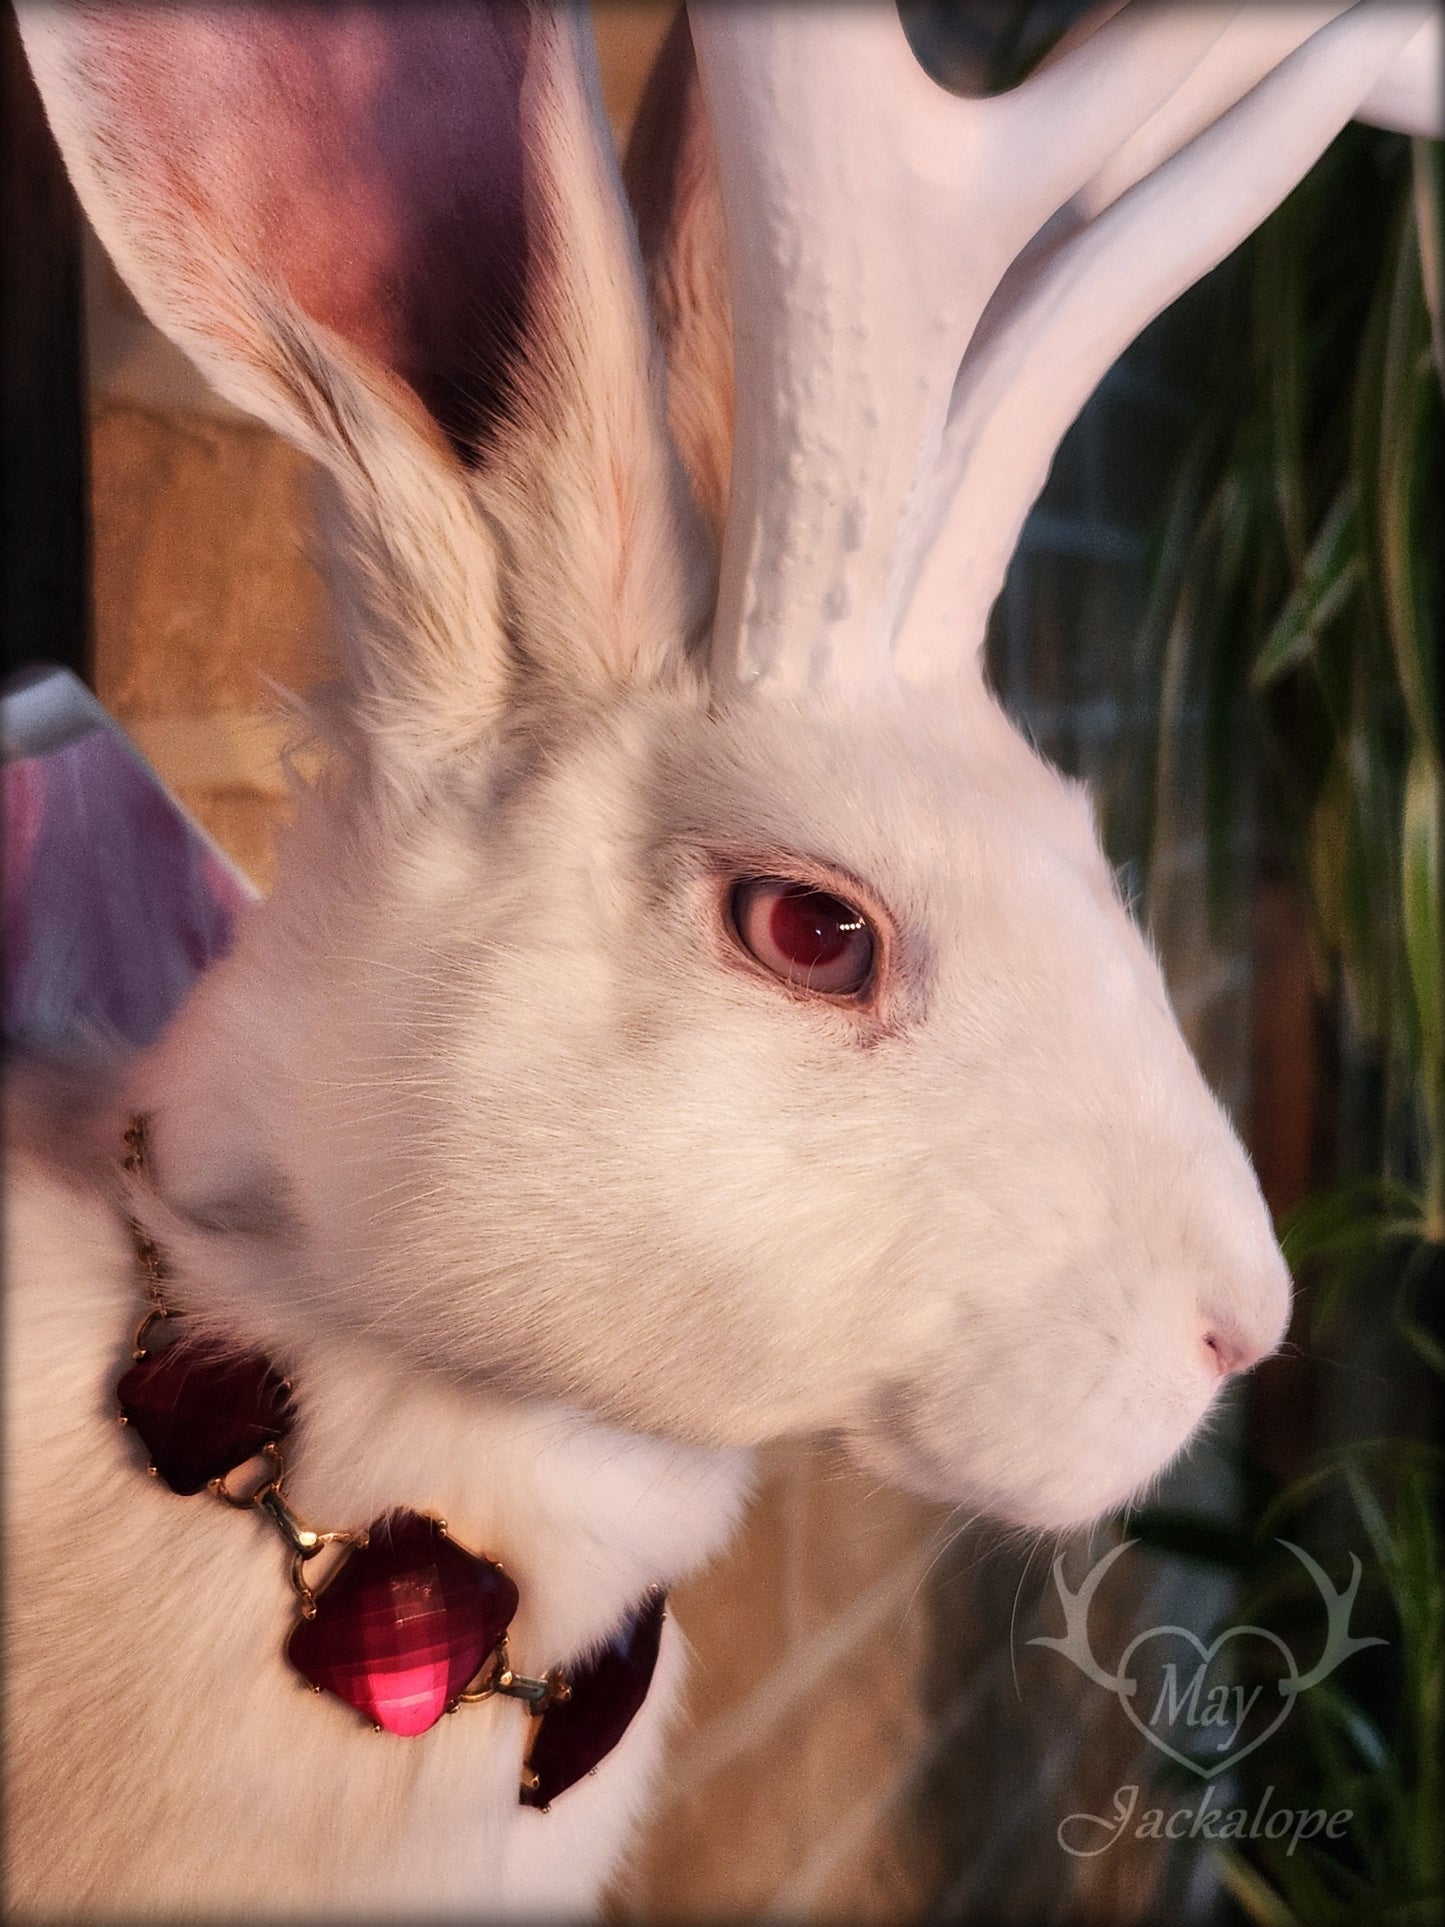 White Jackalope taxidermy with albino eyes, big white antlers replica & a necklace